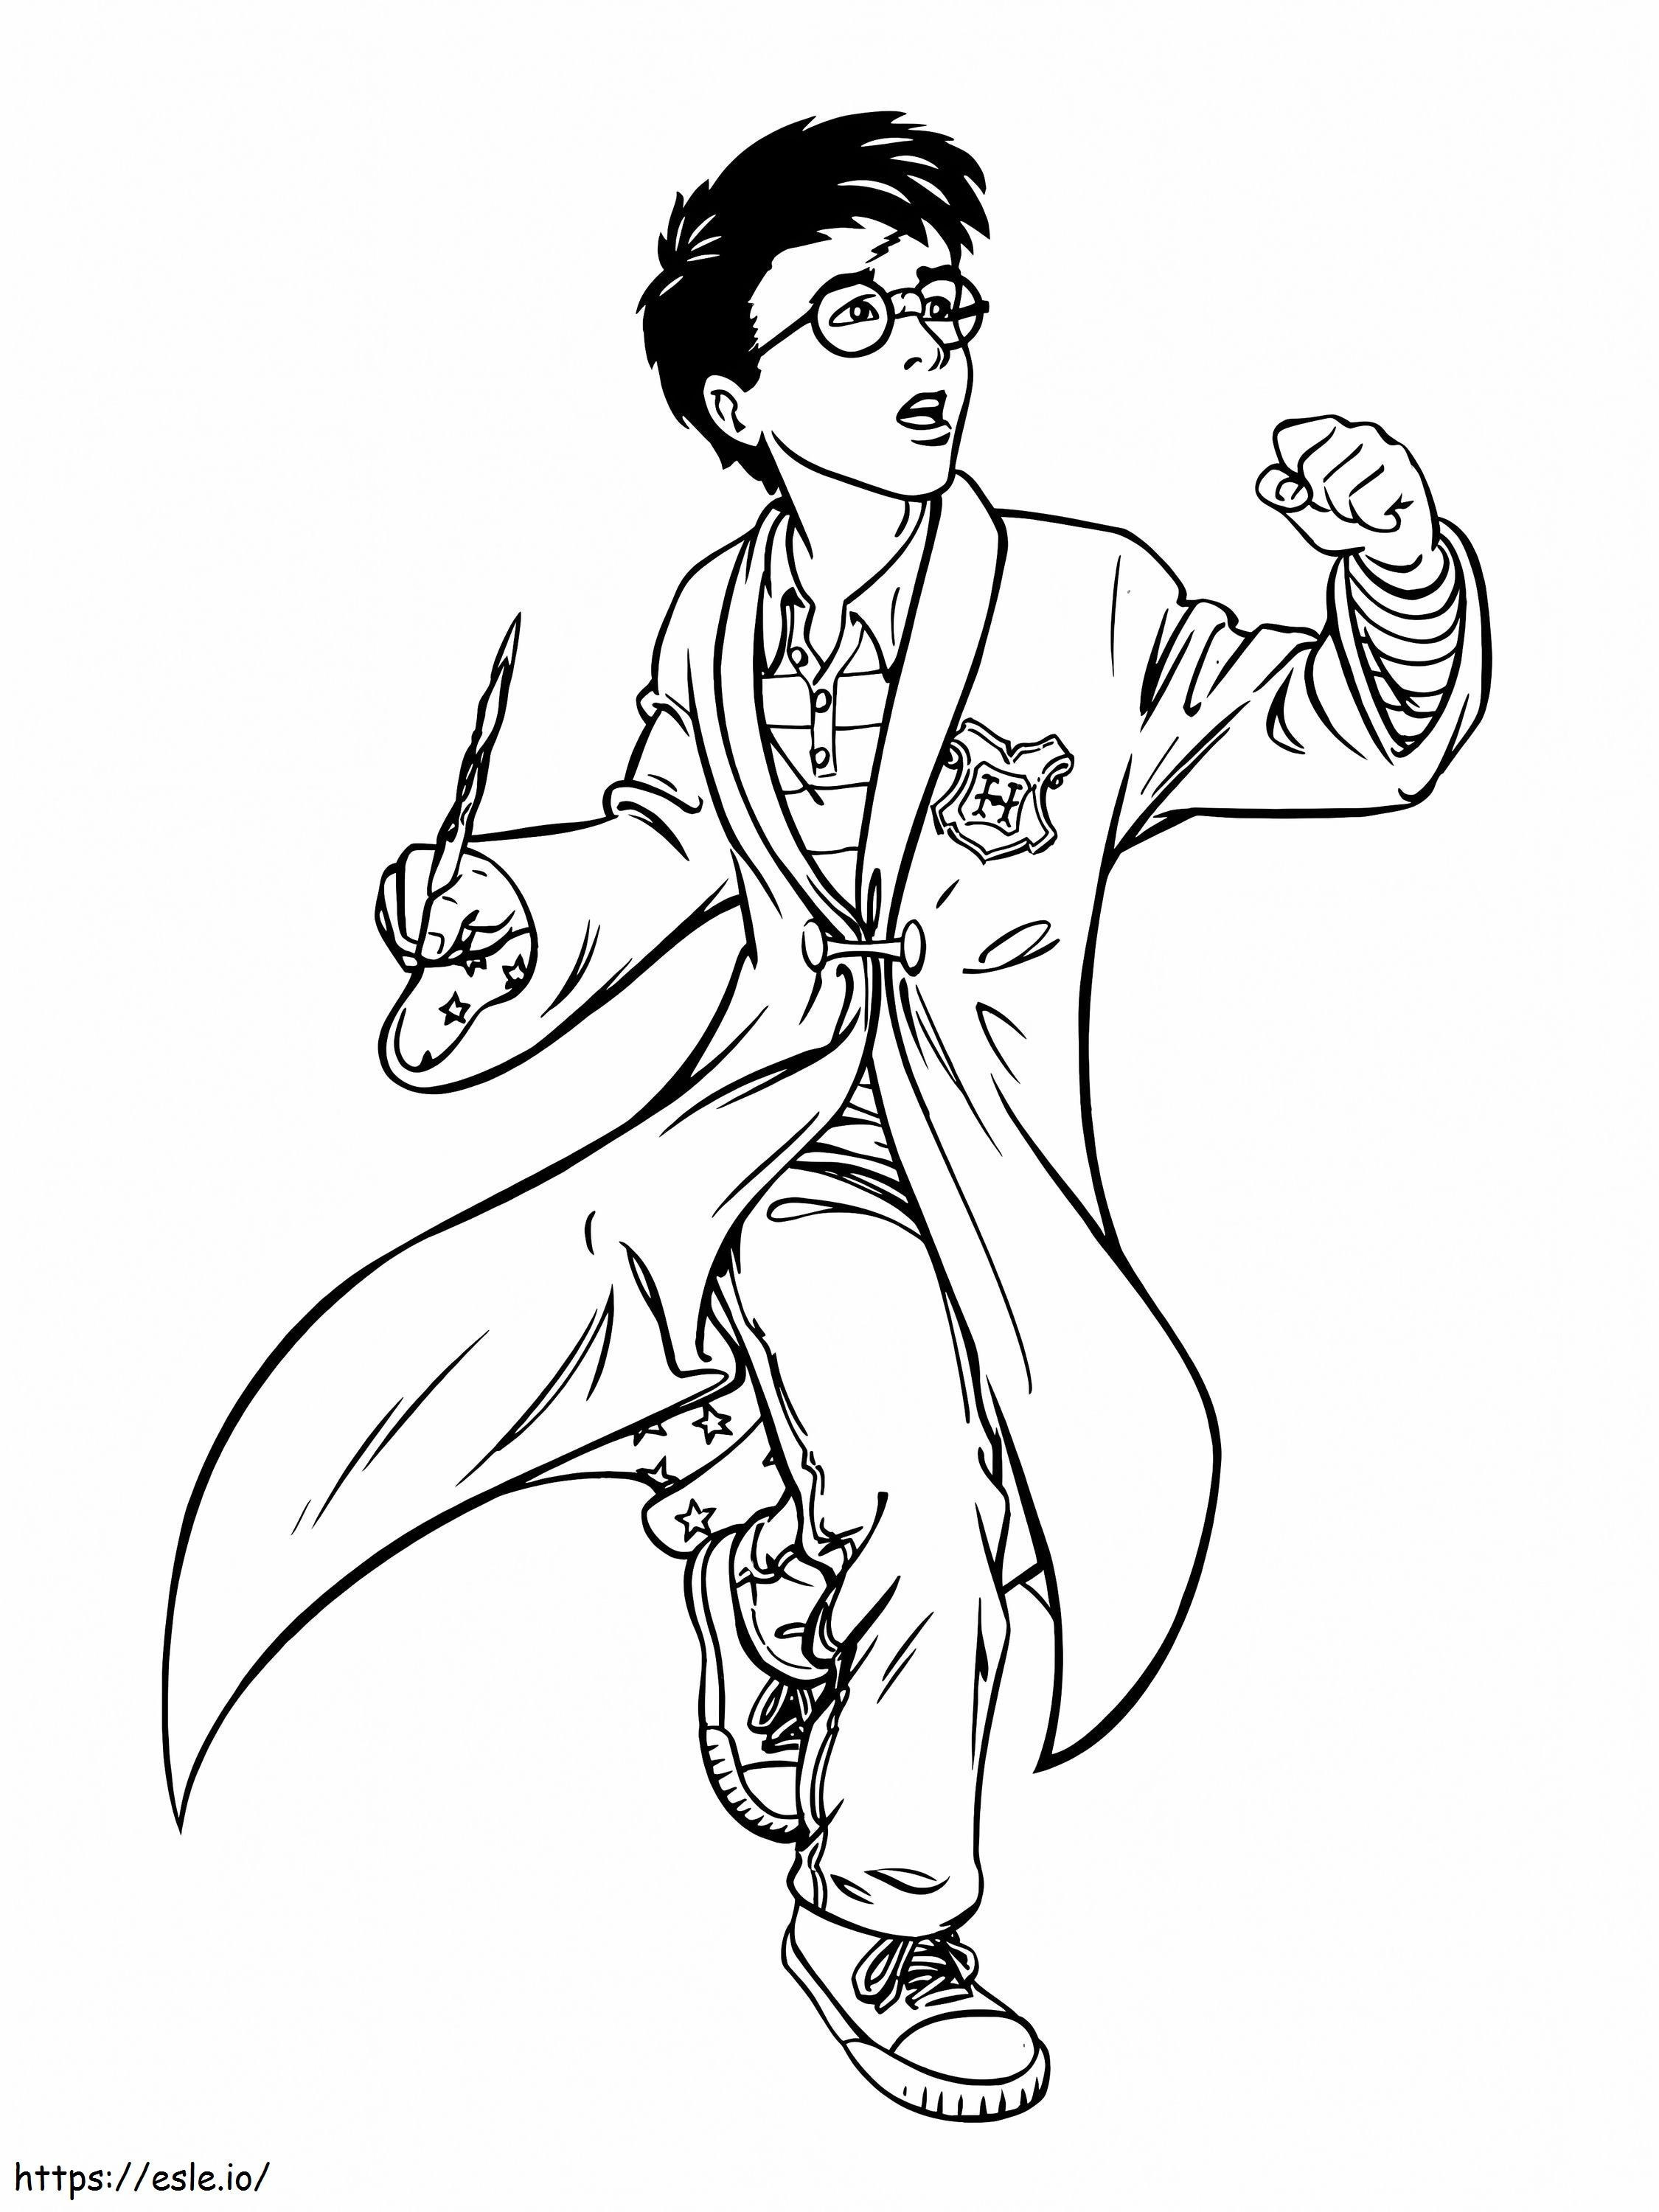 Harry Potter With Magic Wand coloring page